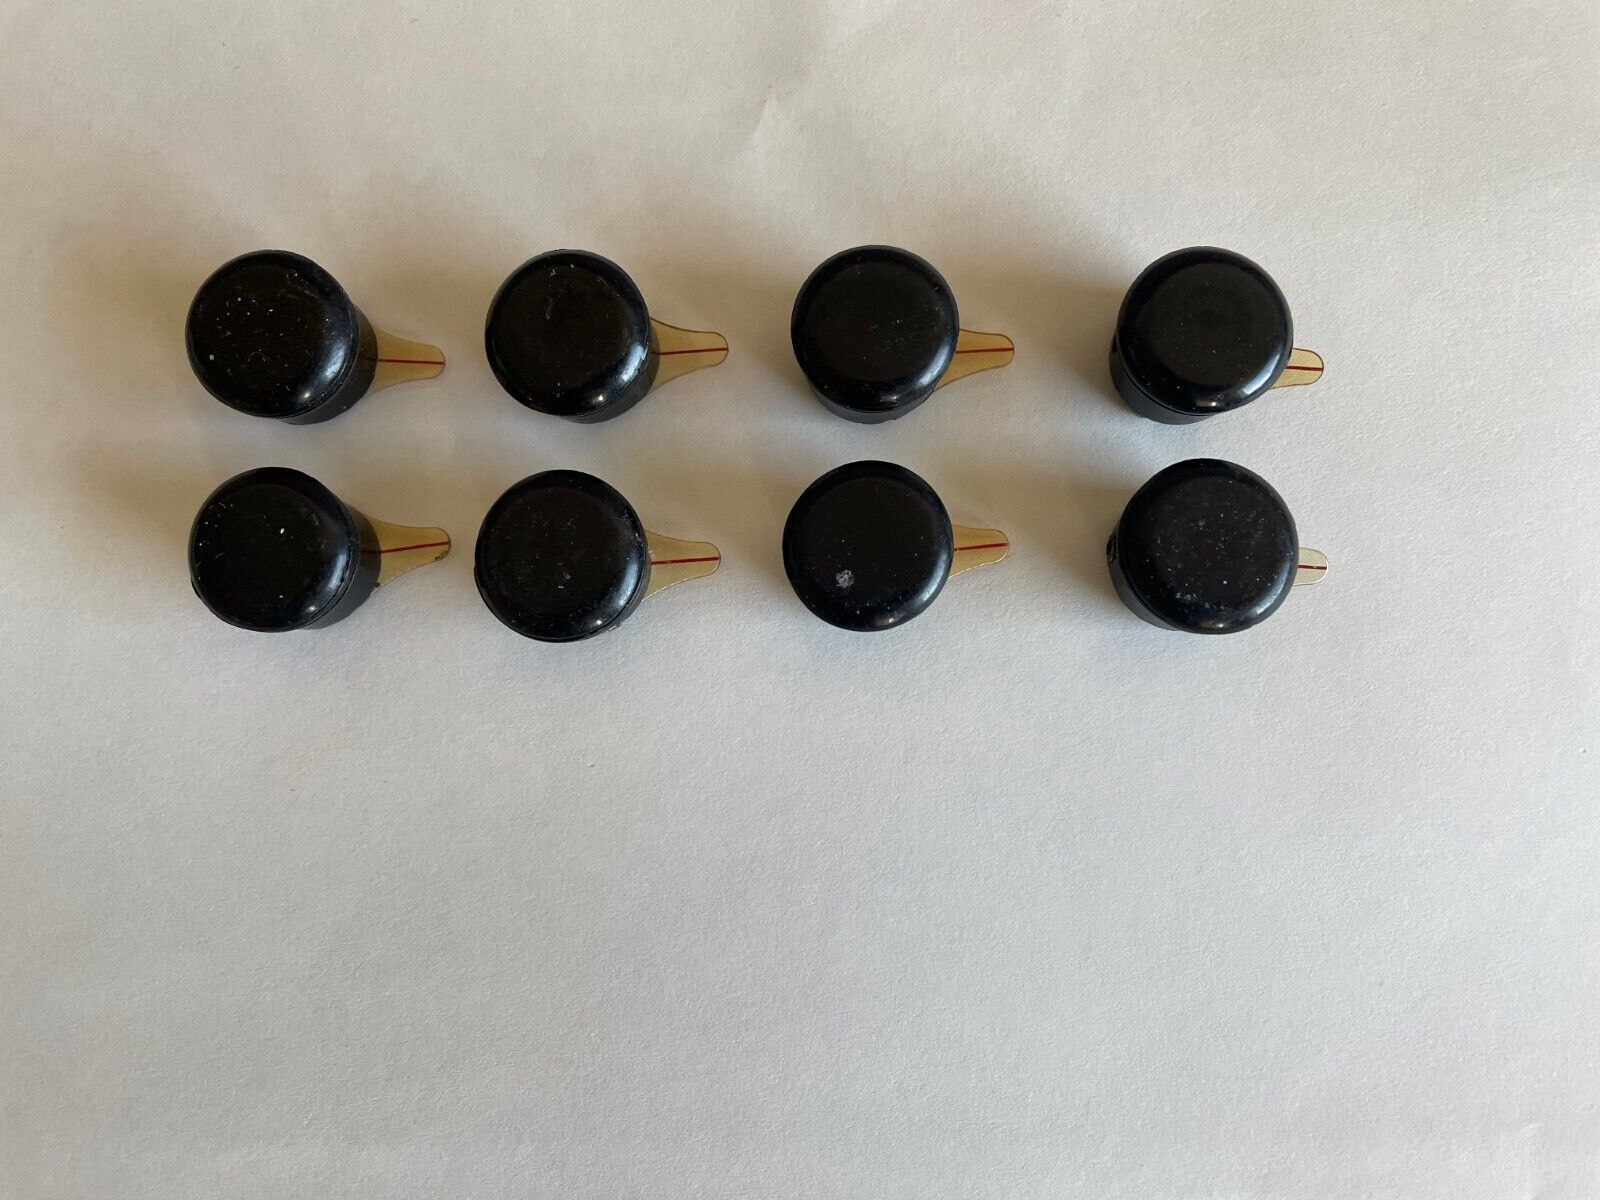 Vintage Round Black Knobs with Translucent Plastic Pointers Attached, Qty. 8